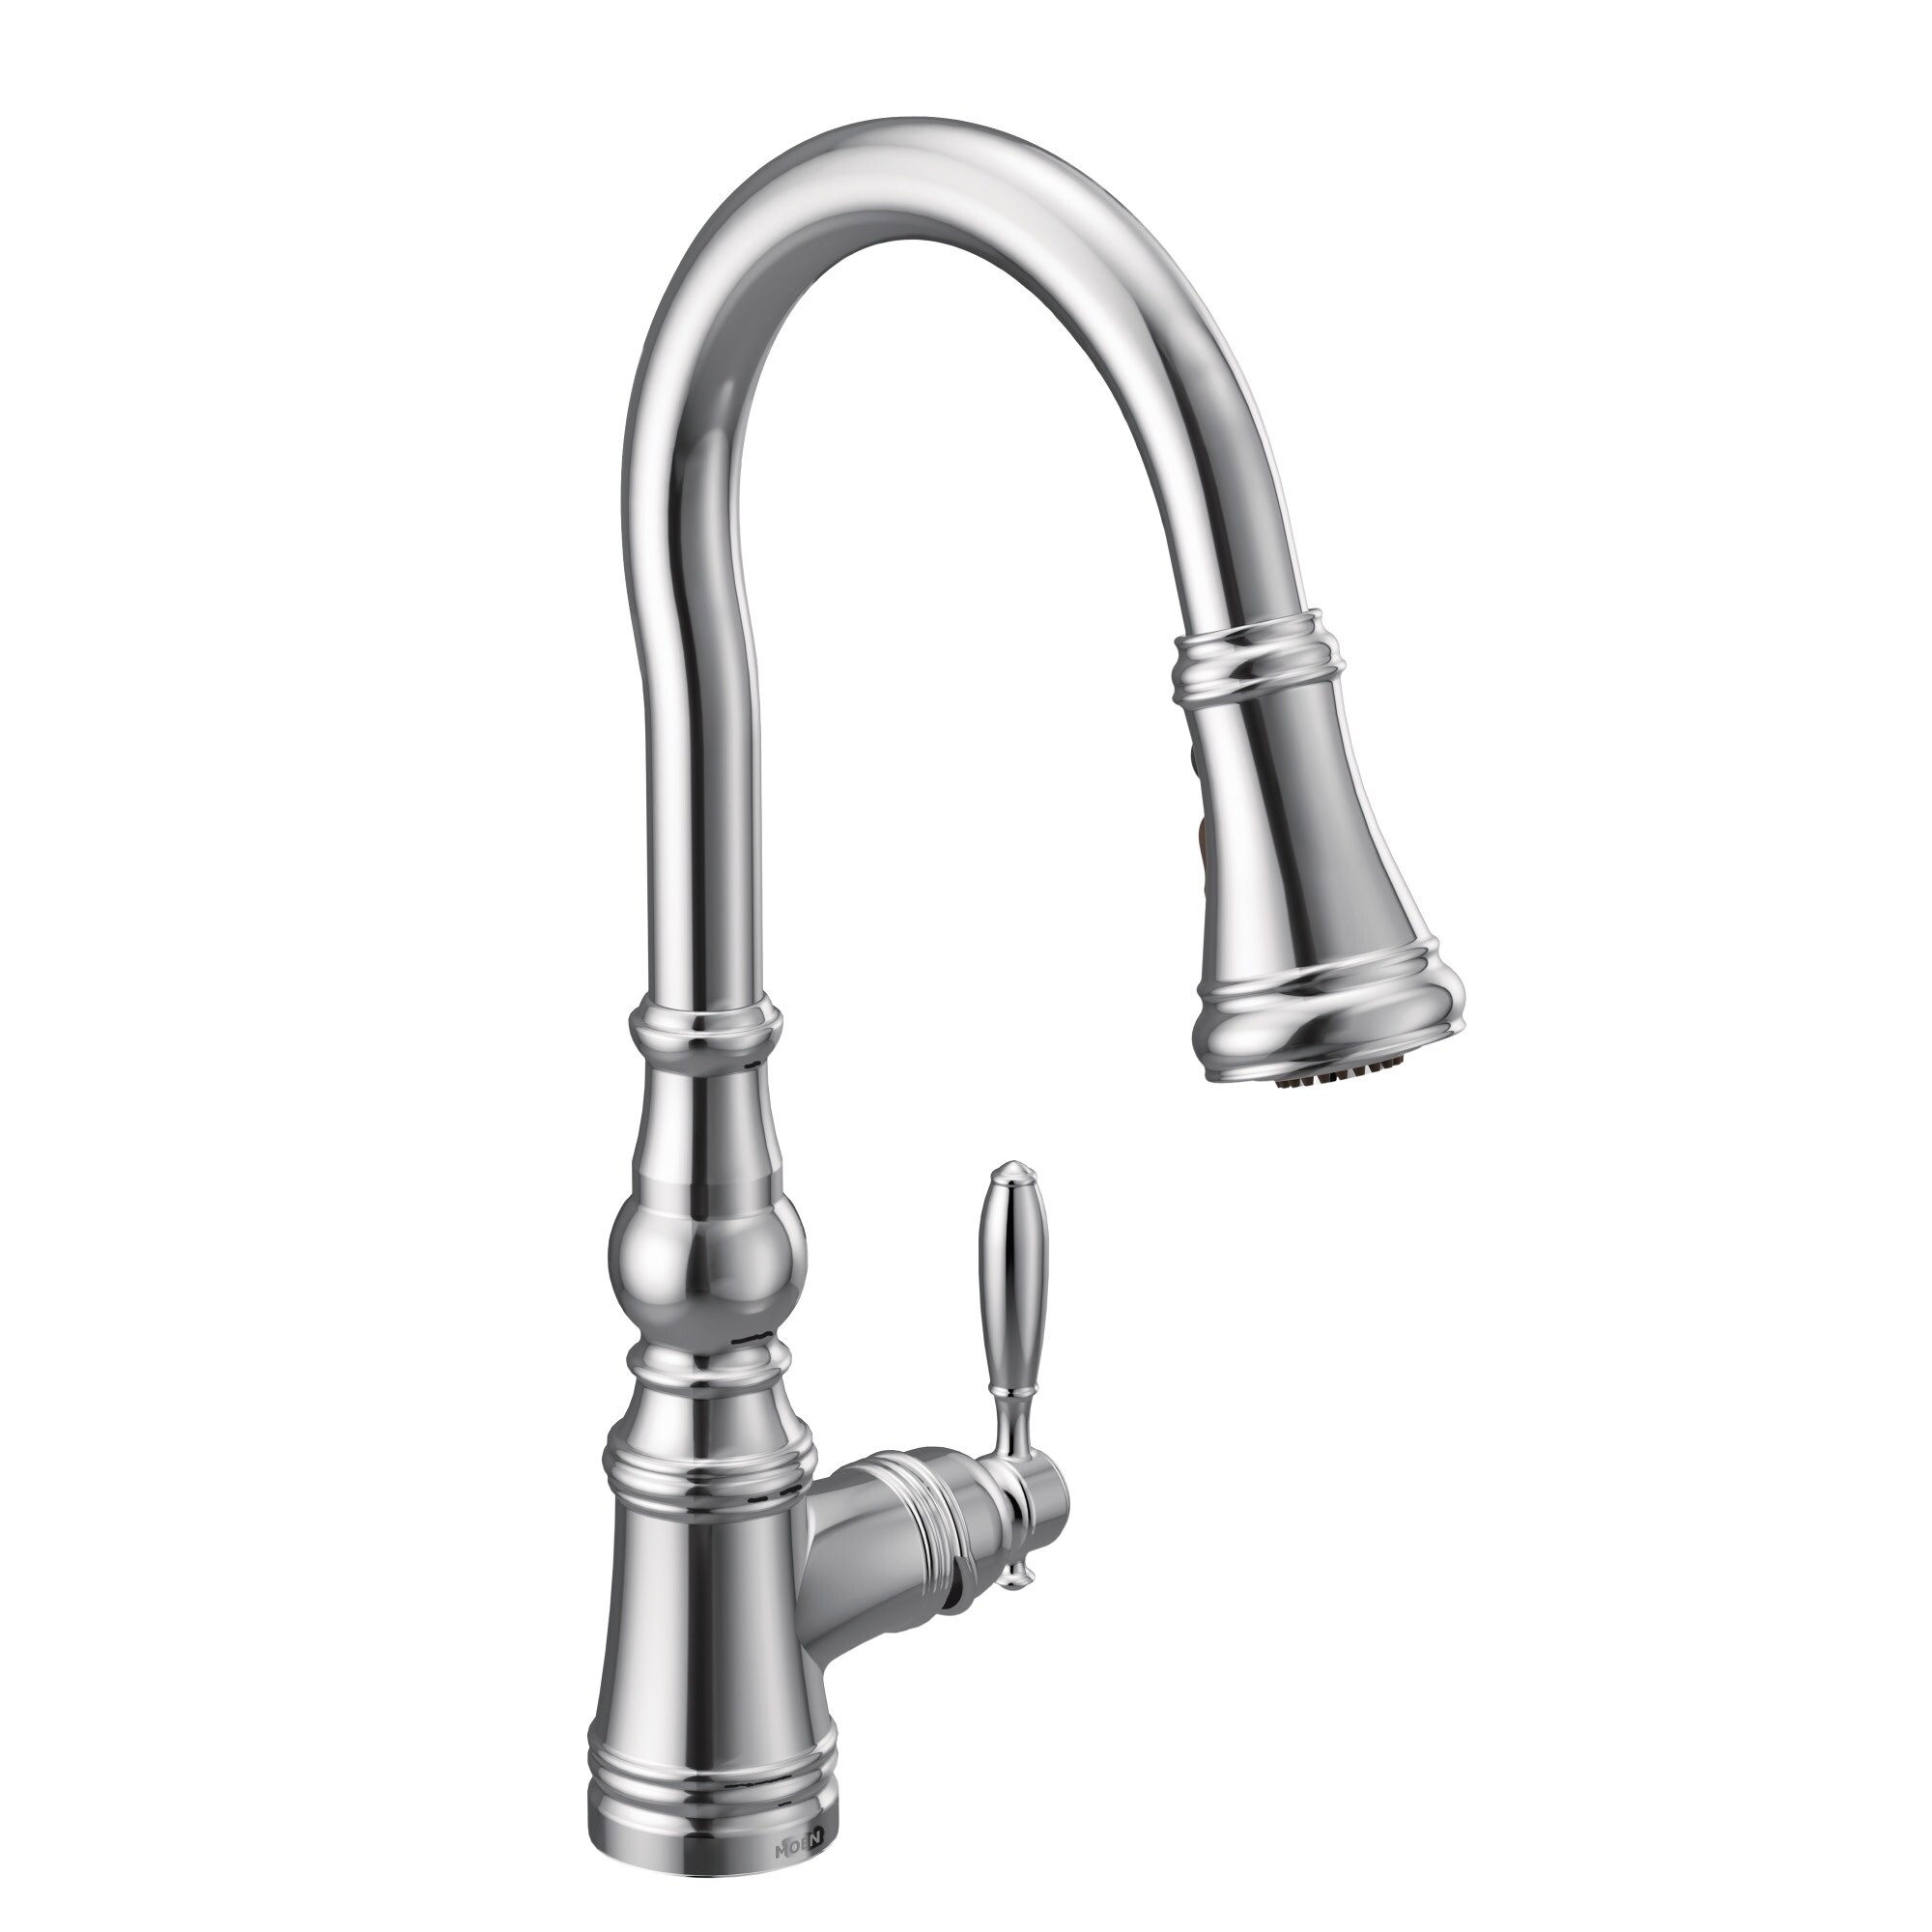 Buy Kitchen Faucets Online At Overstock Out Of Stock Included